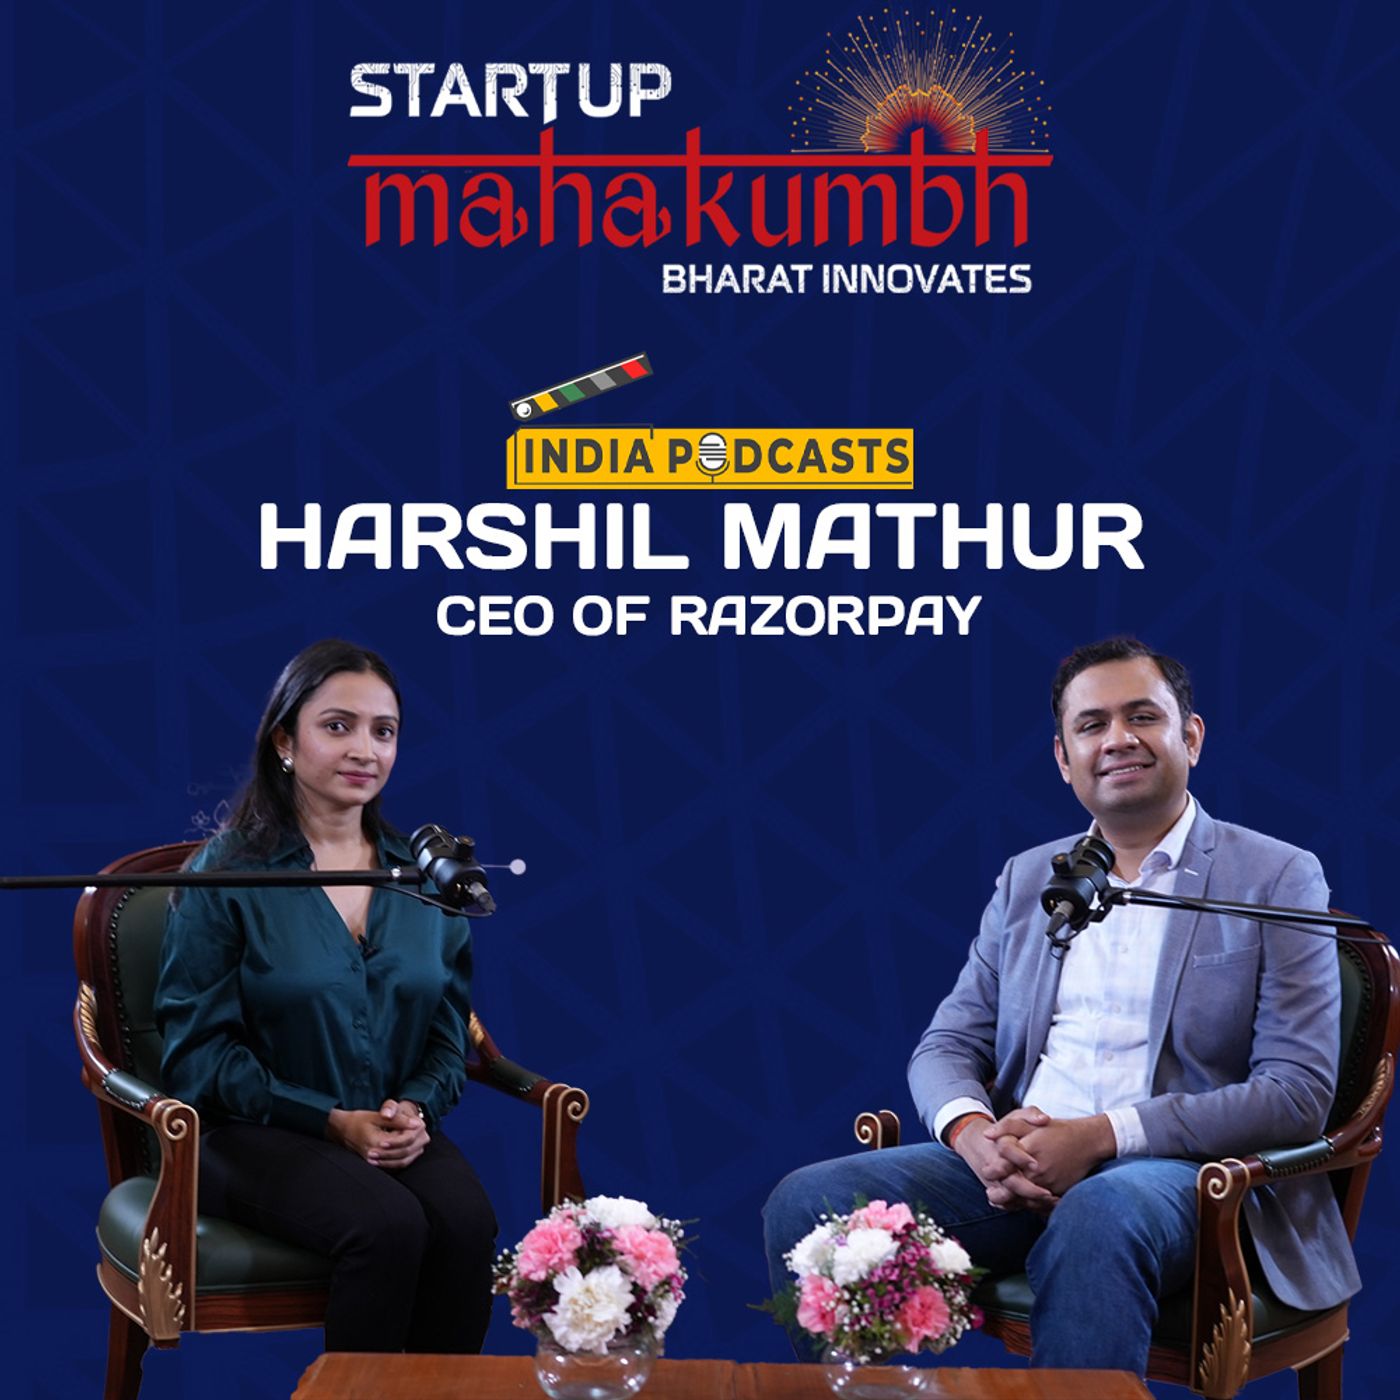 Fintech Is A Bit Complicated Sector & Safety of Customers Is Primary: Harshil Mathur, CEO, Razorpay